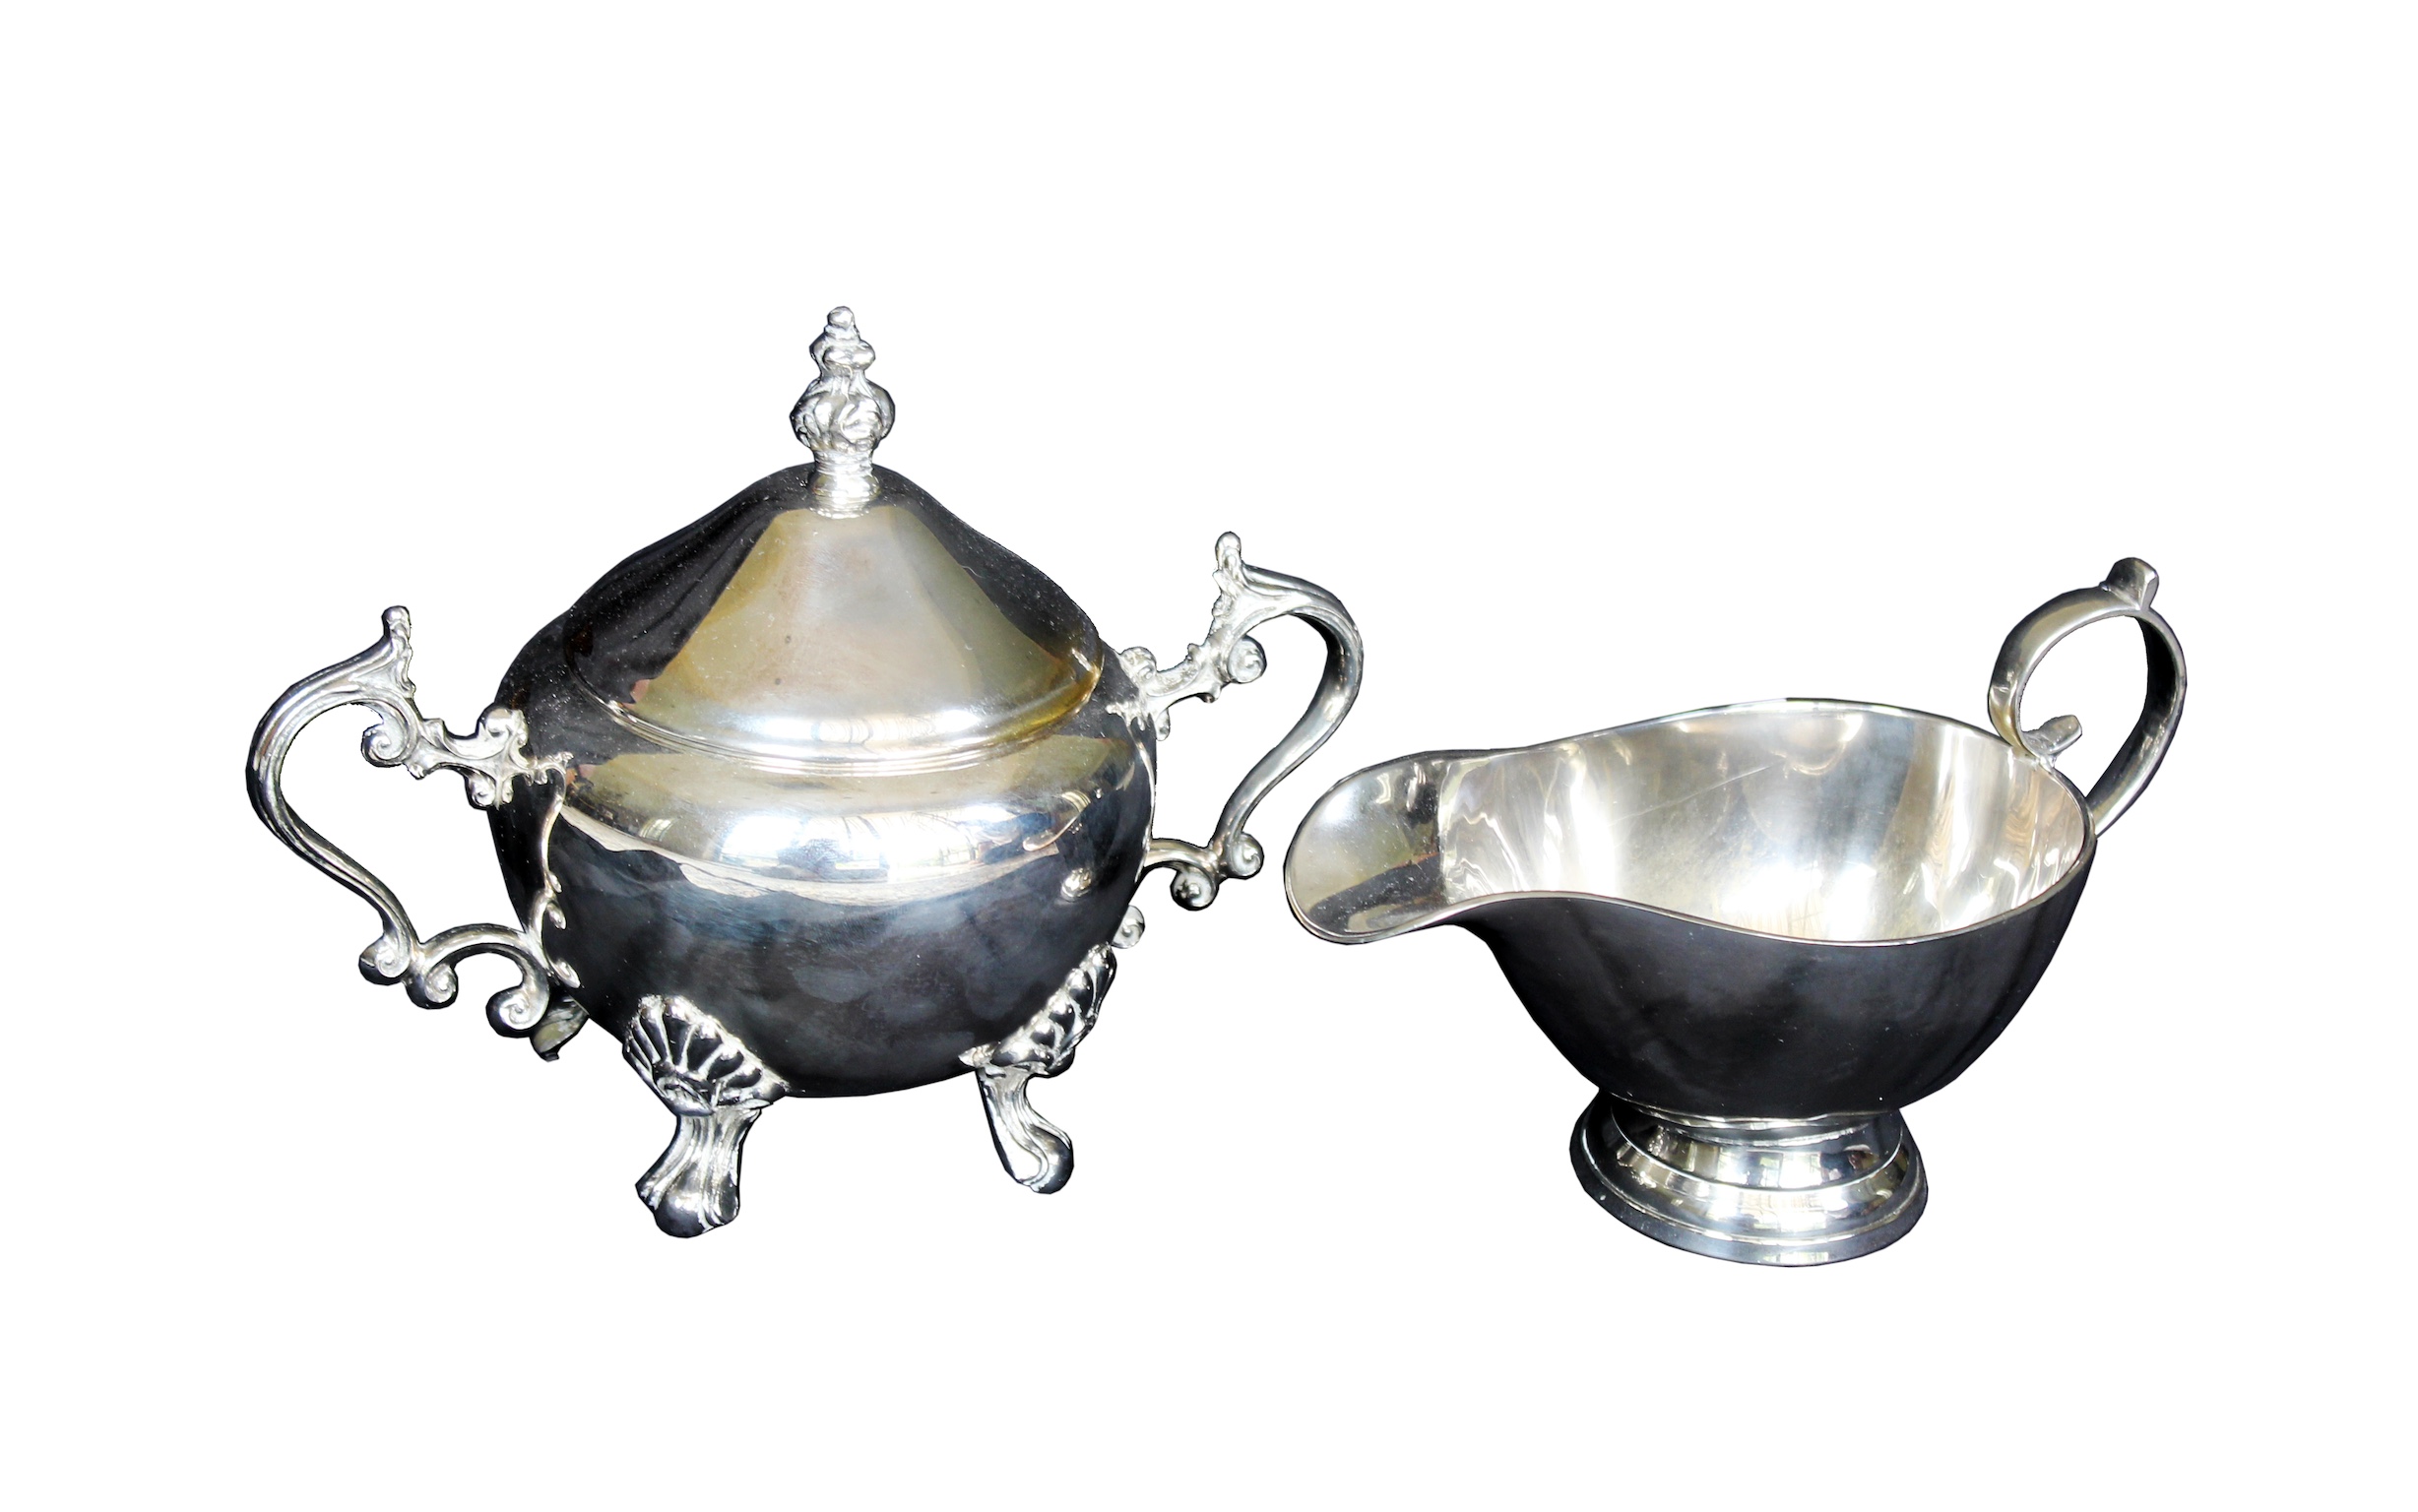 A silver plated sugar bowl with lid and a sauce boat.